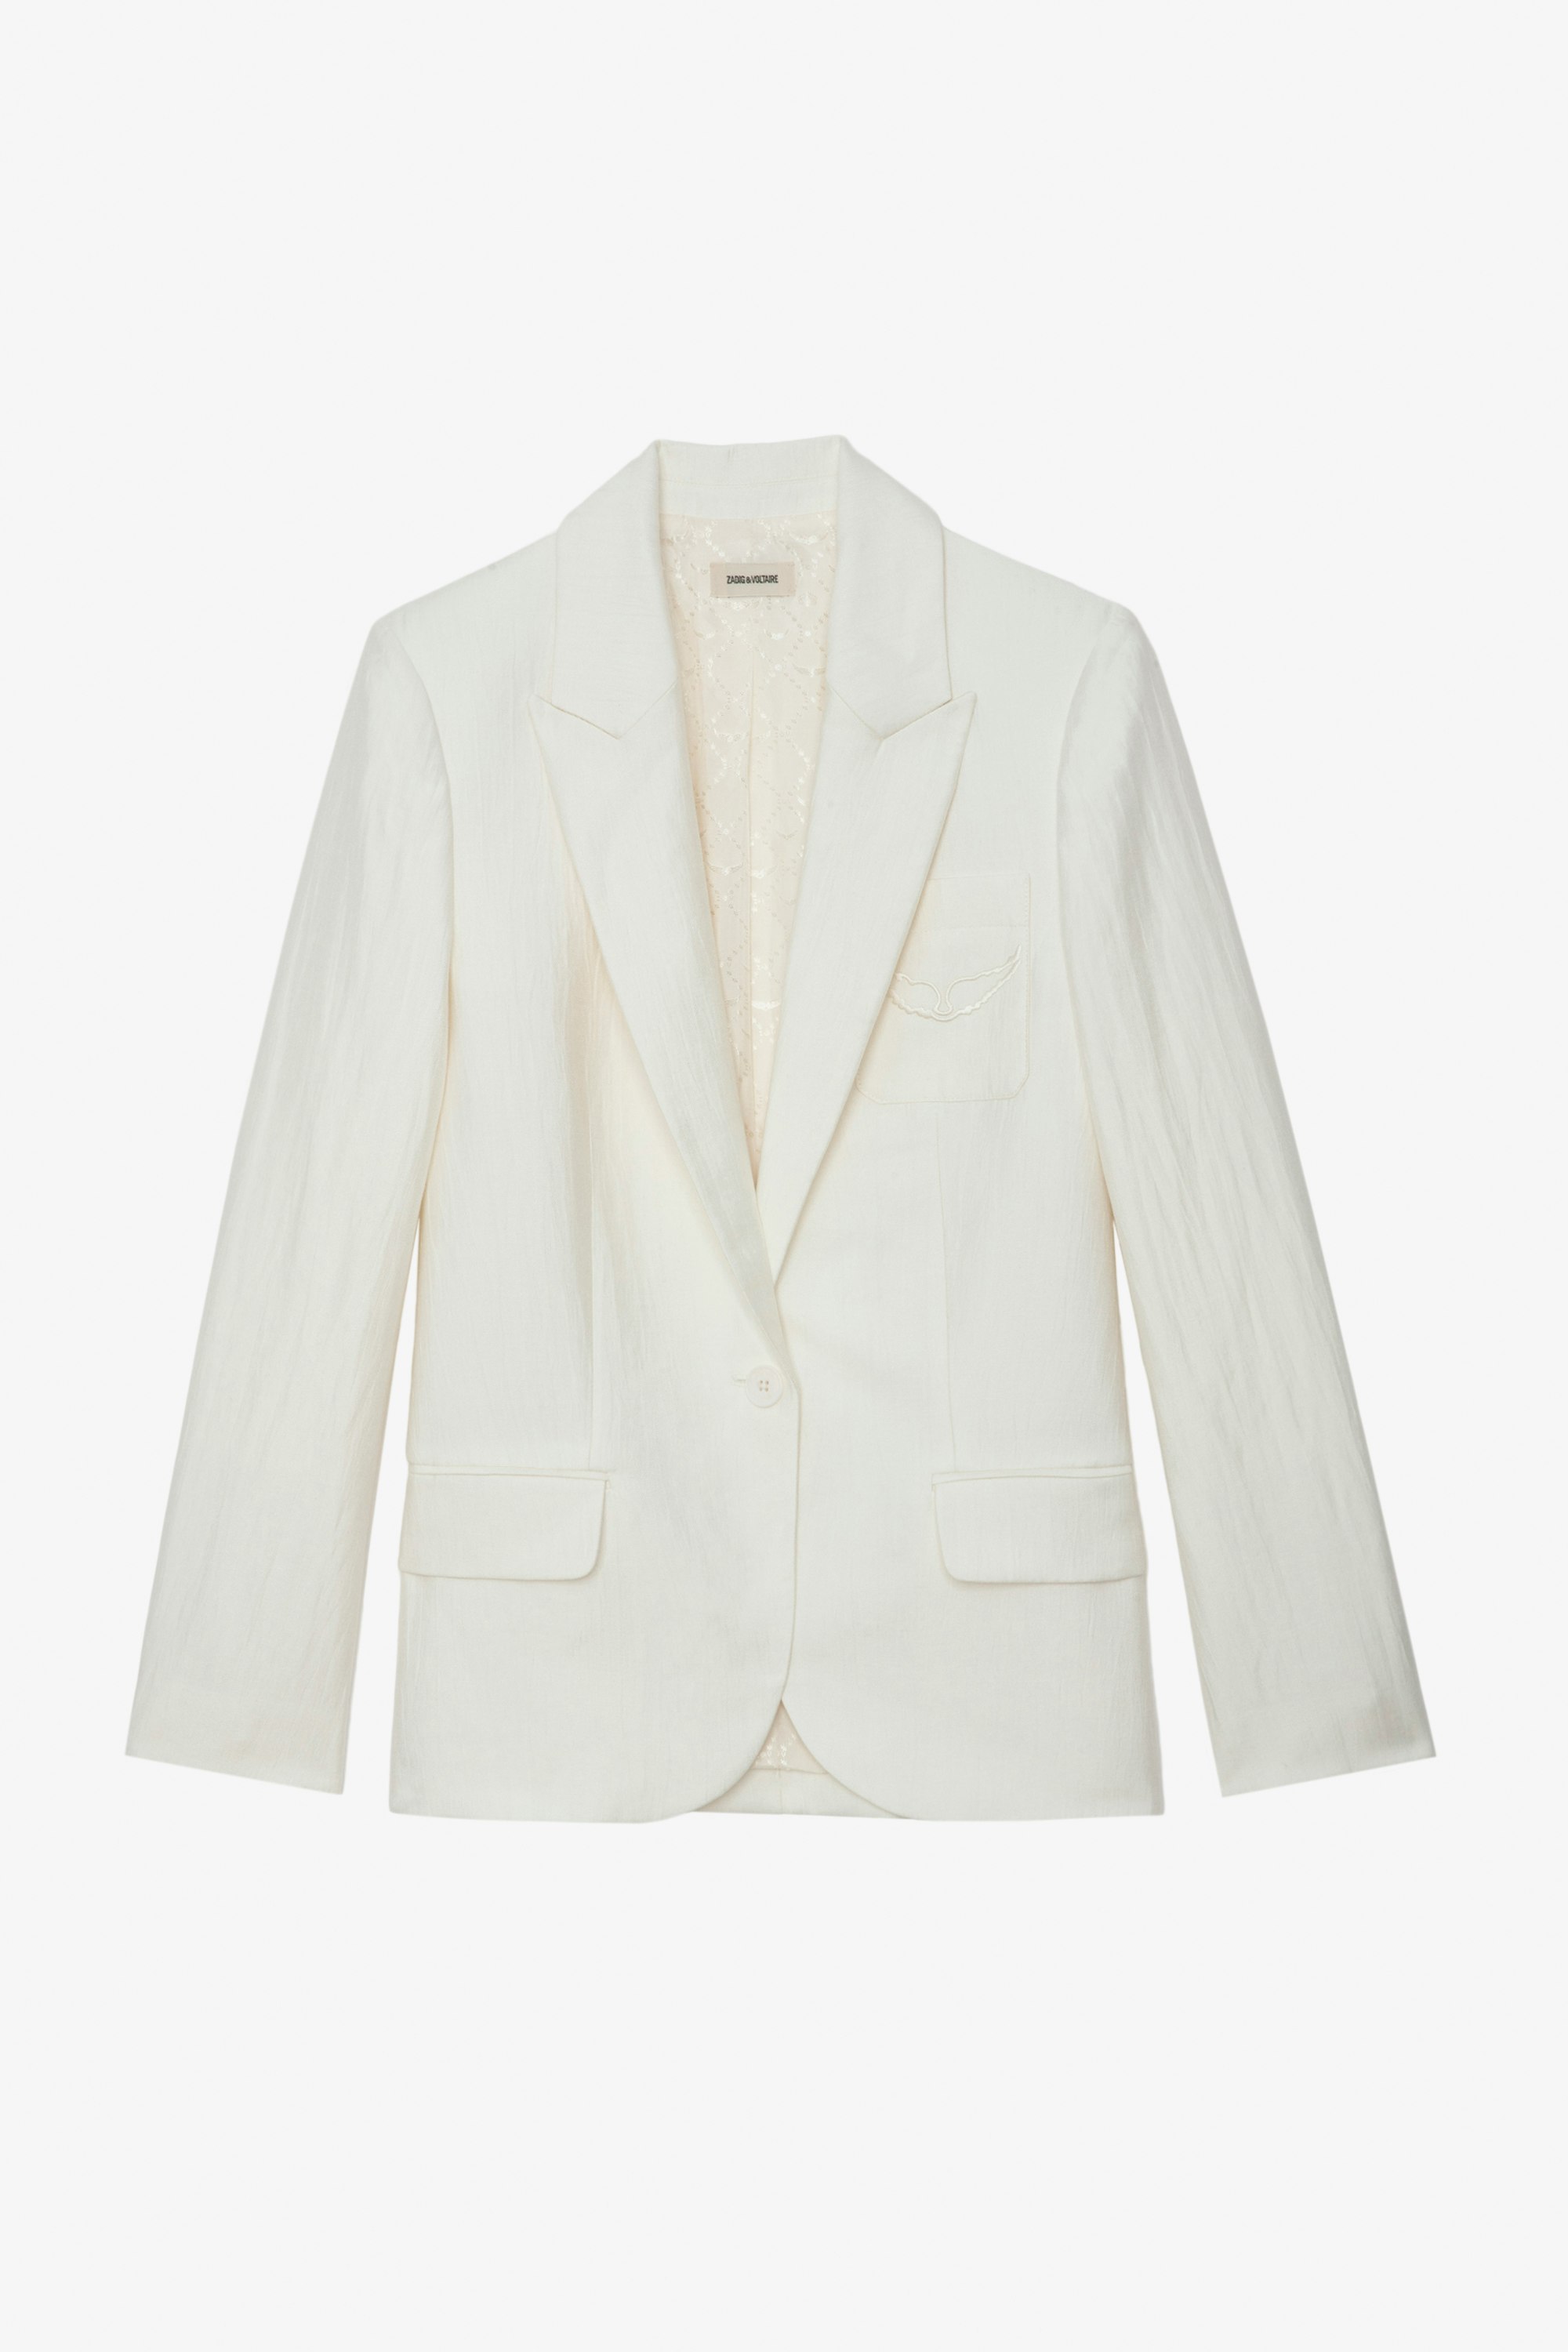 Vow Blazer - White tailored blazer with tailored collar, button closure and pockets with wings motif.